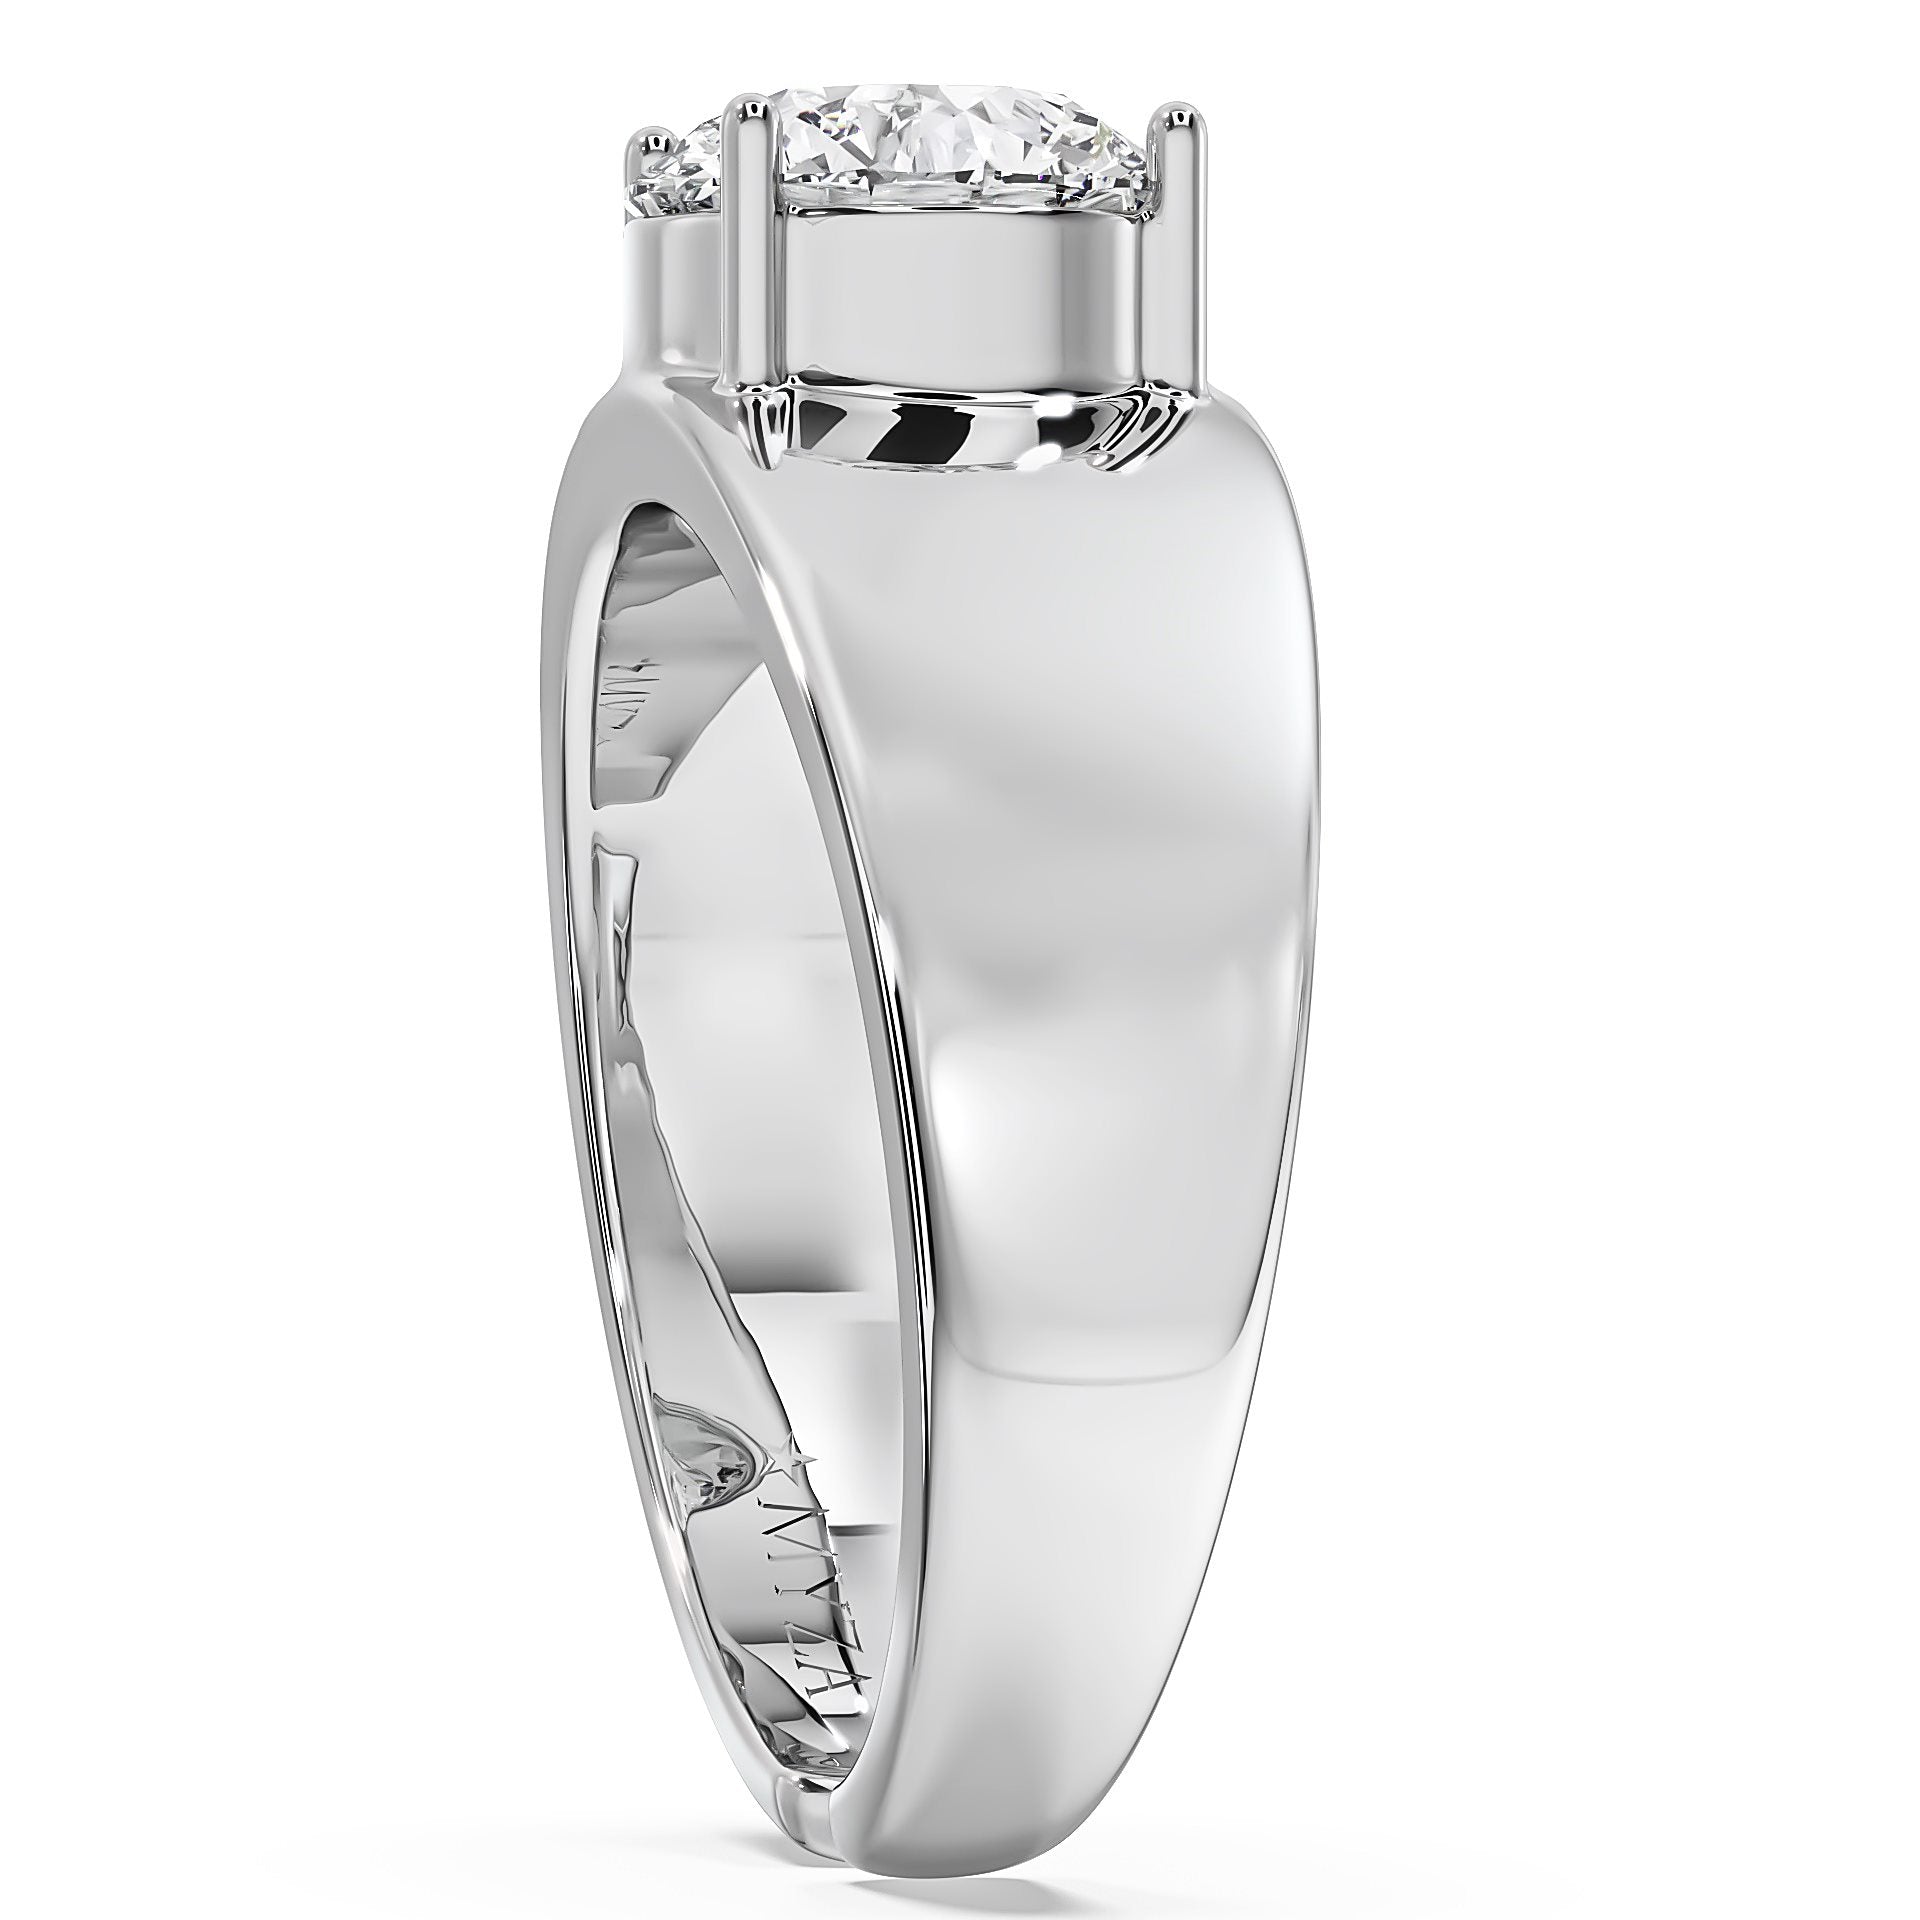 3-Carat MYZA Sterling Silver Men's Ring - Affordable Luxury Symbolizing Love & Style